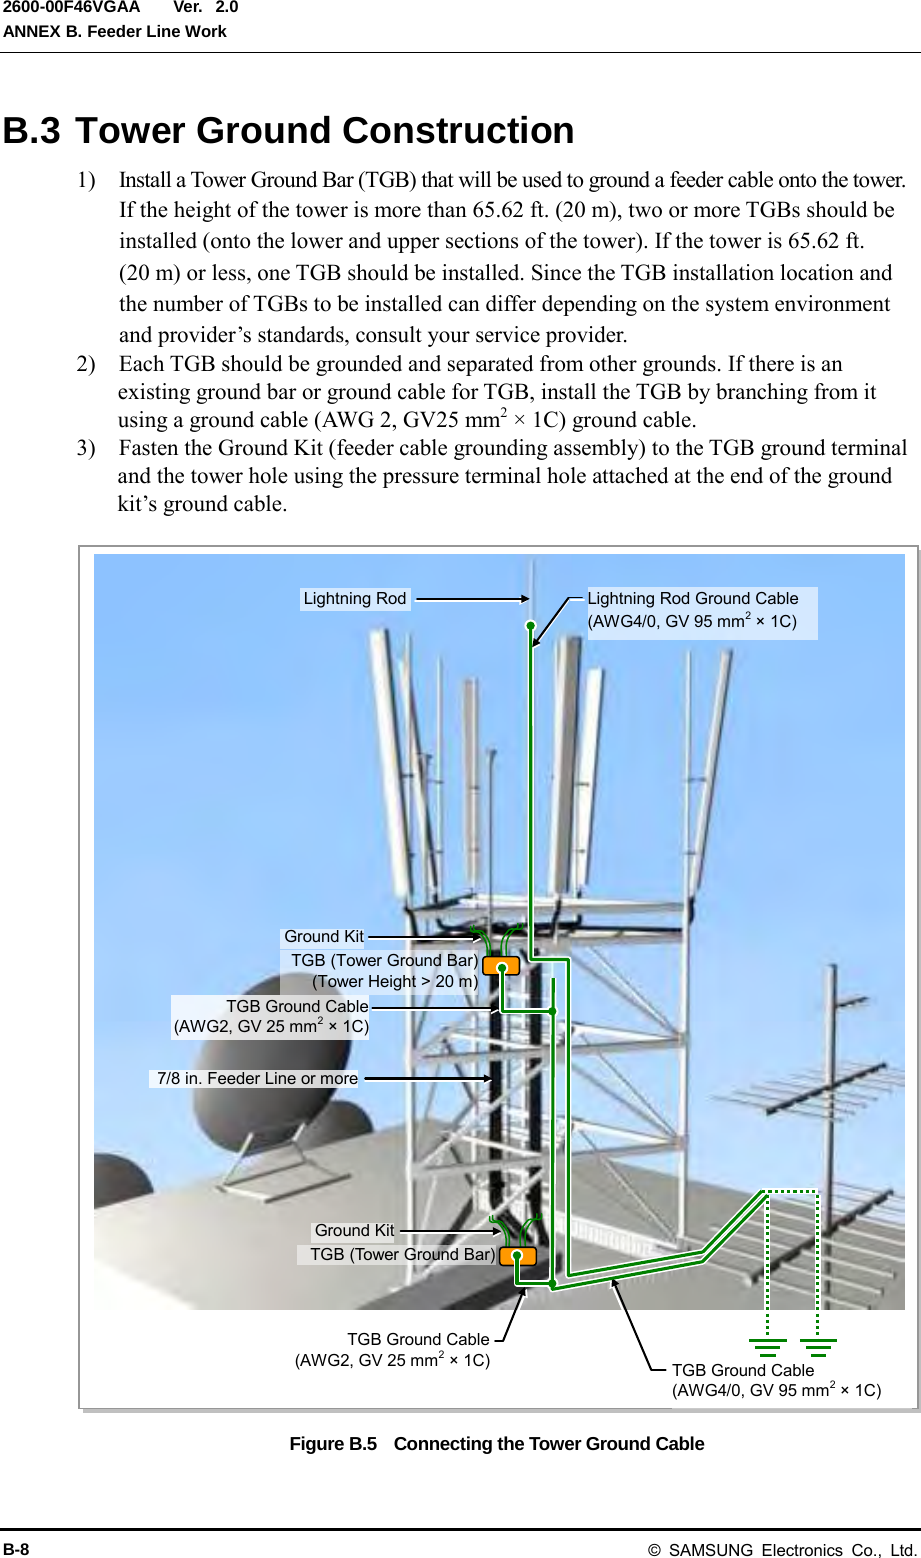  Ver.  ANNEX B. Feeder Line Work 2600-00F46VGAA 2.0 B.3 Tower Ground Construction 1)  Install a Tower Ground Bar (TGB) that will be used to ground a feeder cable onto the tower.   If the height of the tower is more than 65.62 ft. (20 m), two or more TGBs should be installed (onto the lower and upper sections of the tower). If the tower is 65.62 ft.   (20 m) or less, one TGB should be installed. Since the TGB installation location and the number of TGBs to be installed can differ depending on the system environment and provider’s standards, consult your service provider. 2)    Each TGB should be grounded and separated from other grounds. If there is an existing ground bar or ground cable for TGB, install the TGB by branching from it using a ground cable (AWG 2, GV25 mm2 × 1C) ground cable. 3)    Fasten the Ground Kit (feeder cable grounding assembly) to the TGB ground terminal and the tower hole using the pressure terminal hole attached at the end of the ground kit’s ground cable.  Figure B.5  Connecting the Tower Ground Cable  Lightning Rod 7/8 in. Feeder Line or more Ground Kit TGB (Tower Ground Bar) (Tower Height &gt; 20 m) TGB Ground Cable (AWG2, GV 25 mm2 × 1C) Lightning Rod Ground Cable (AWG4/0, GV 95 mm2 × 1C) TGB (Tower Ground Bar) Ground Kit TGB Ground Cable (AWG2, GV 25 mm2 × 1C) TGB Ground Cable (AWG4/0, GV 95 mm2 × 1C) B-8 © SAMSUNG Electronics Co., Ltd. 